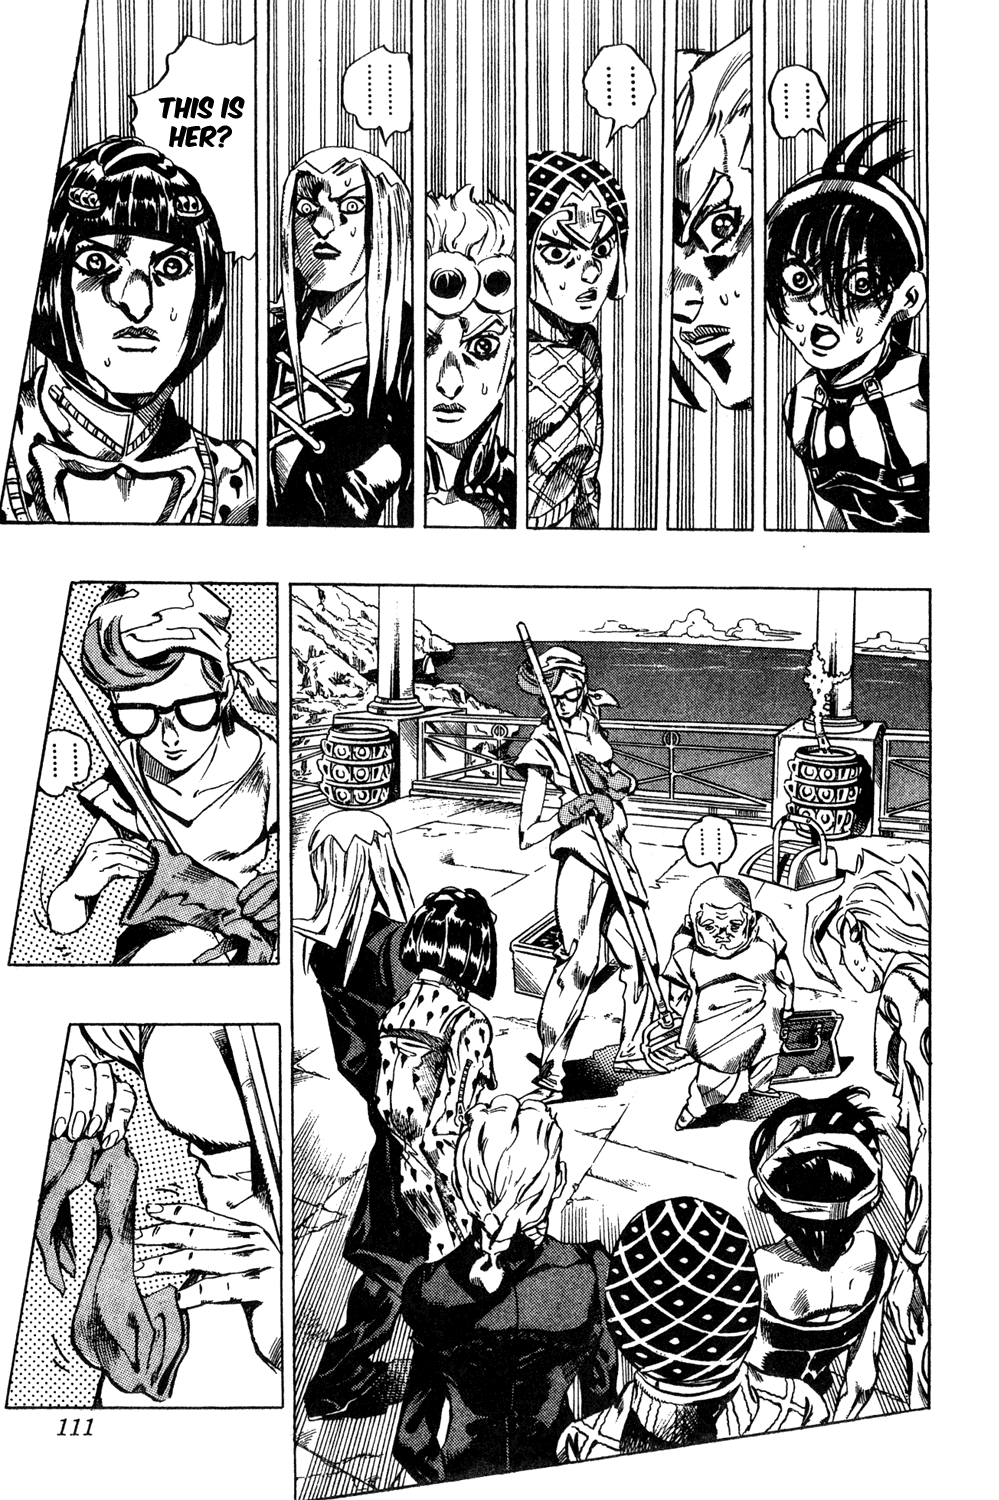 Jojo's Bizarre Adventure Part 5 - Vento Aureo Vol.4 Chapter 30: Capo Buccellati; First Orders From The Boss - Picture 3